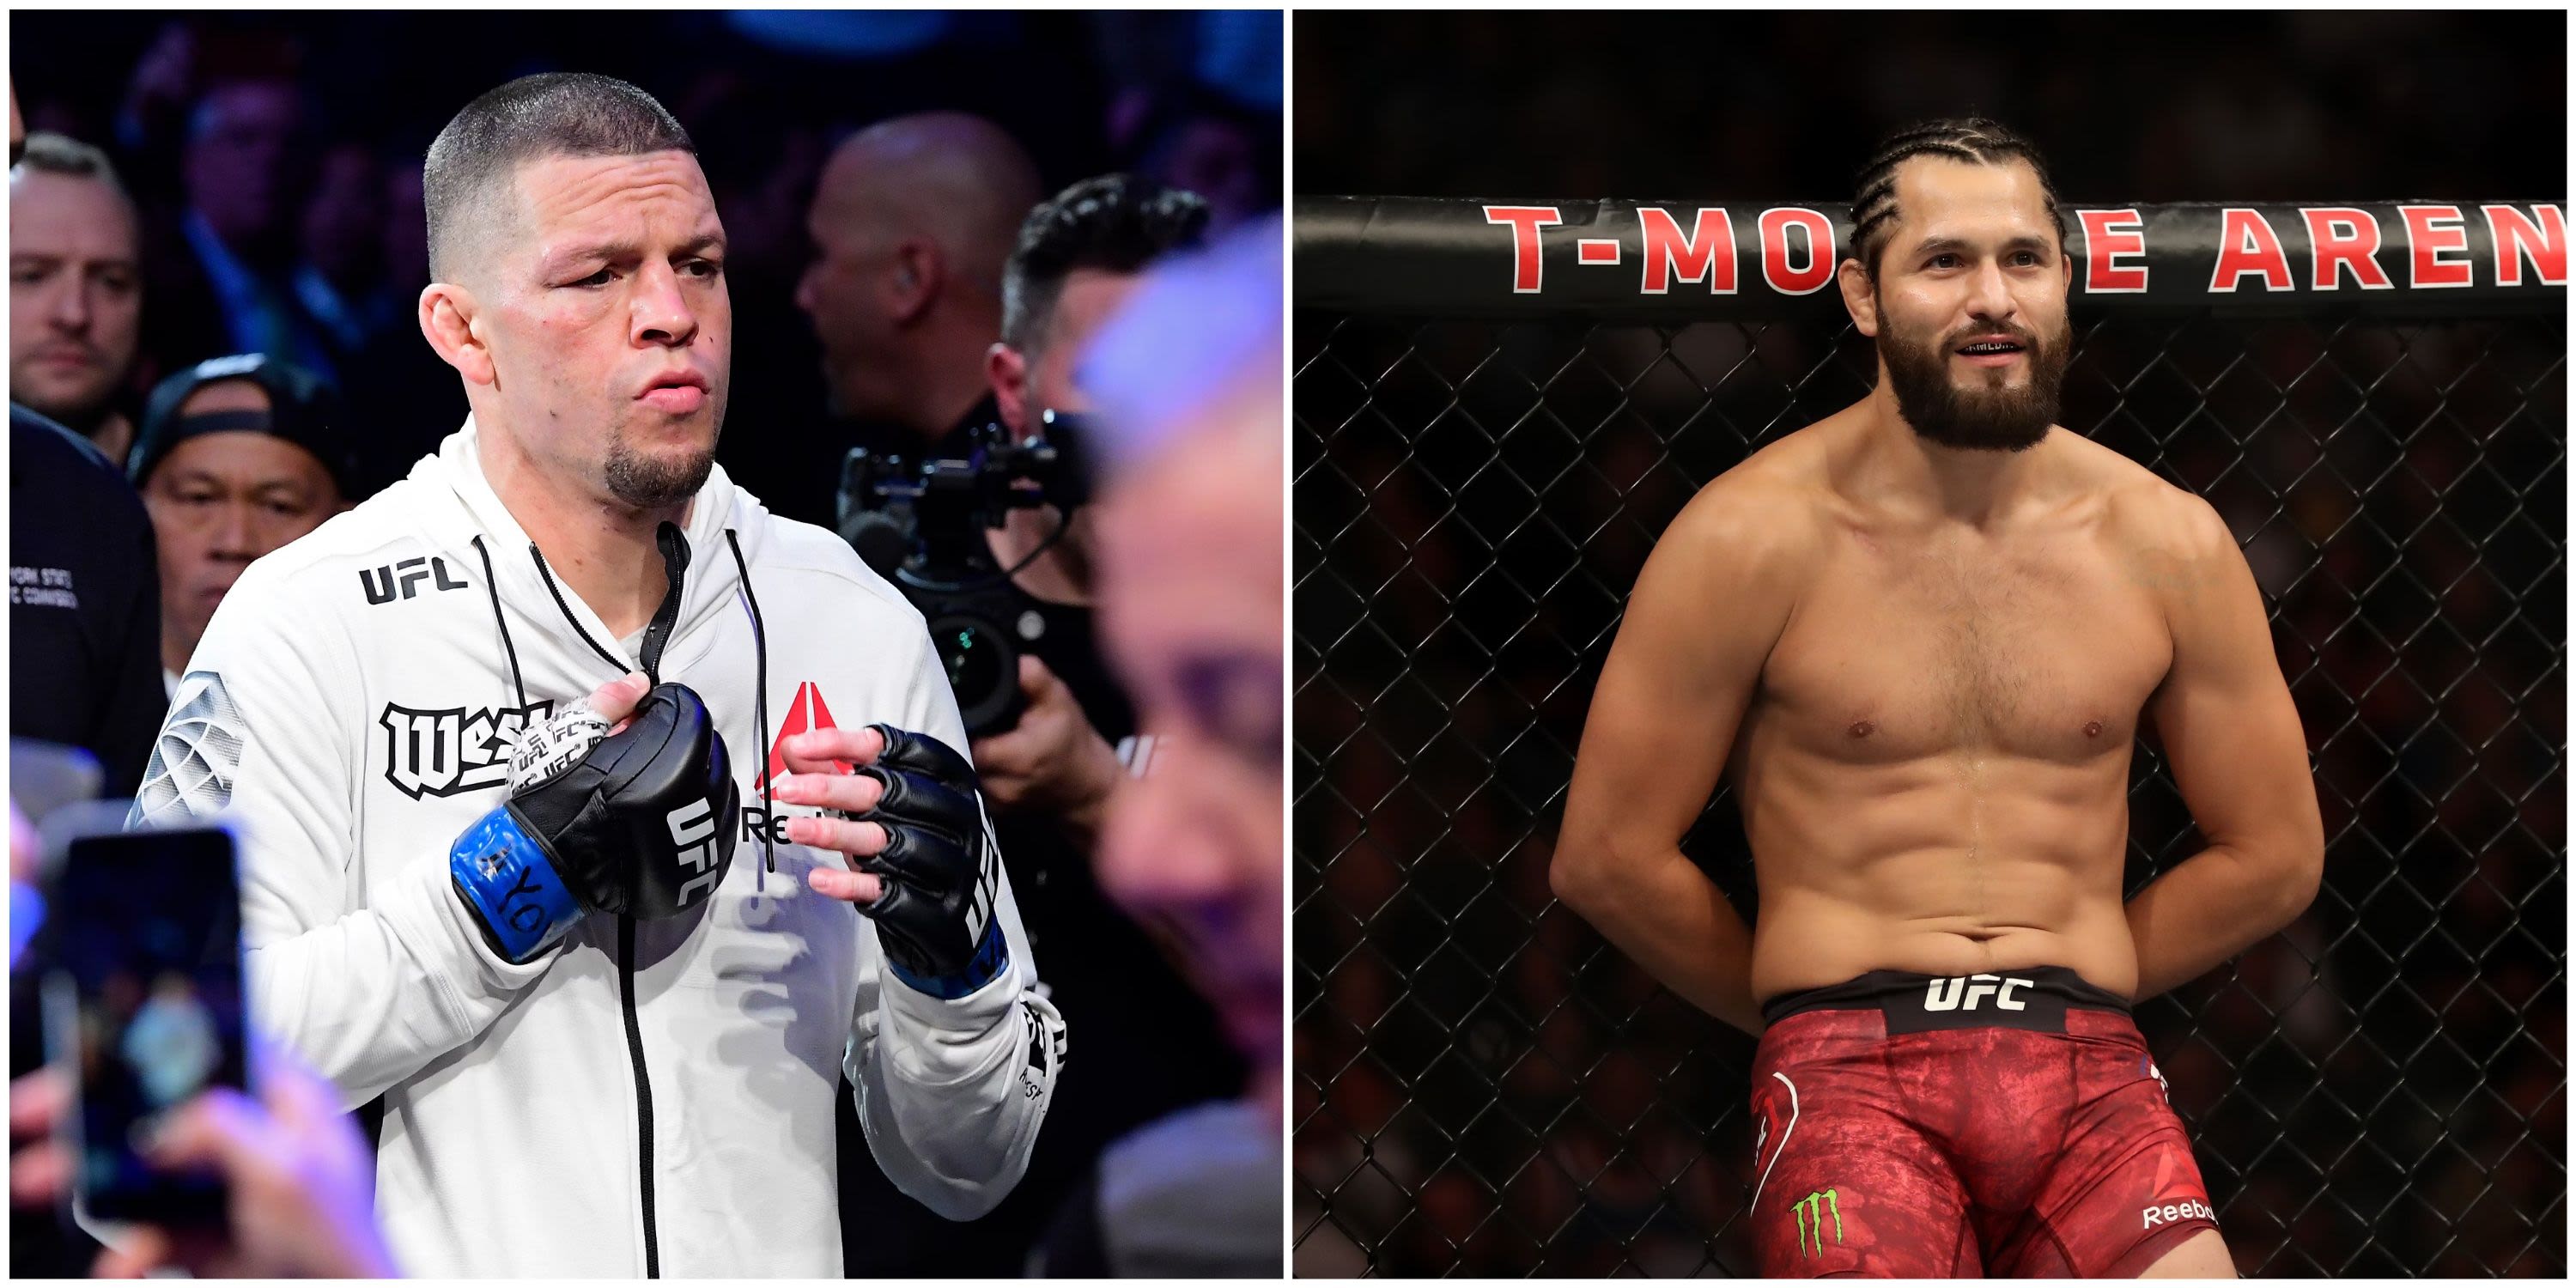 Nate Diaz vs Jorge Masvidal boxing match sees date and venue changed just weeks out from the fight